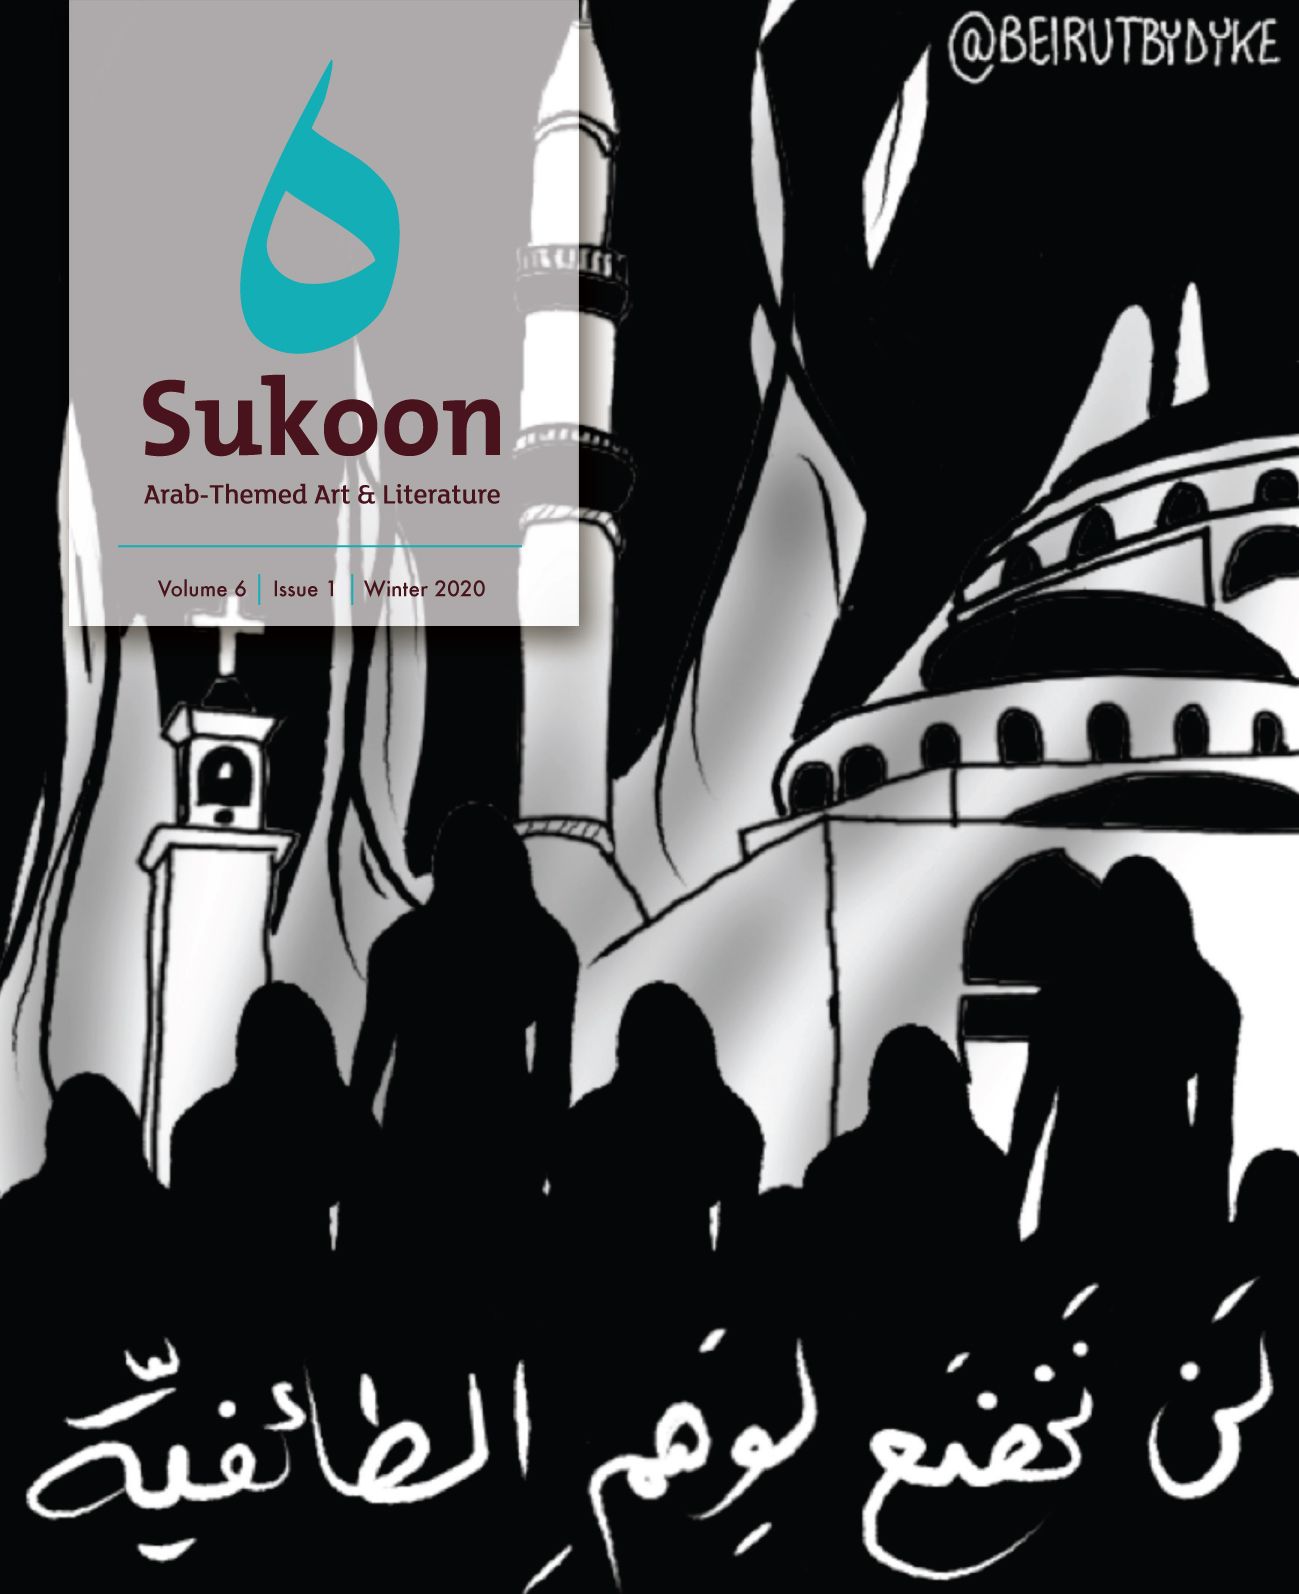 Image of Sukoon online literary journal Issue 11 cover